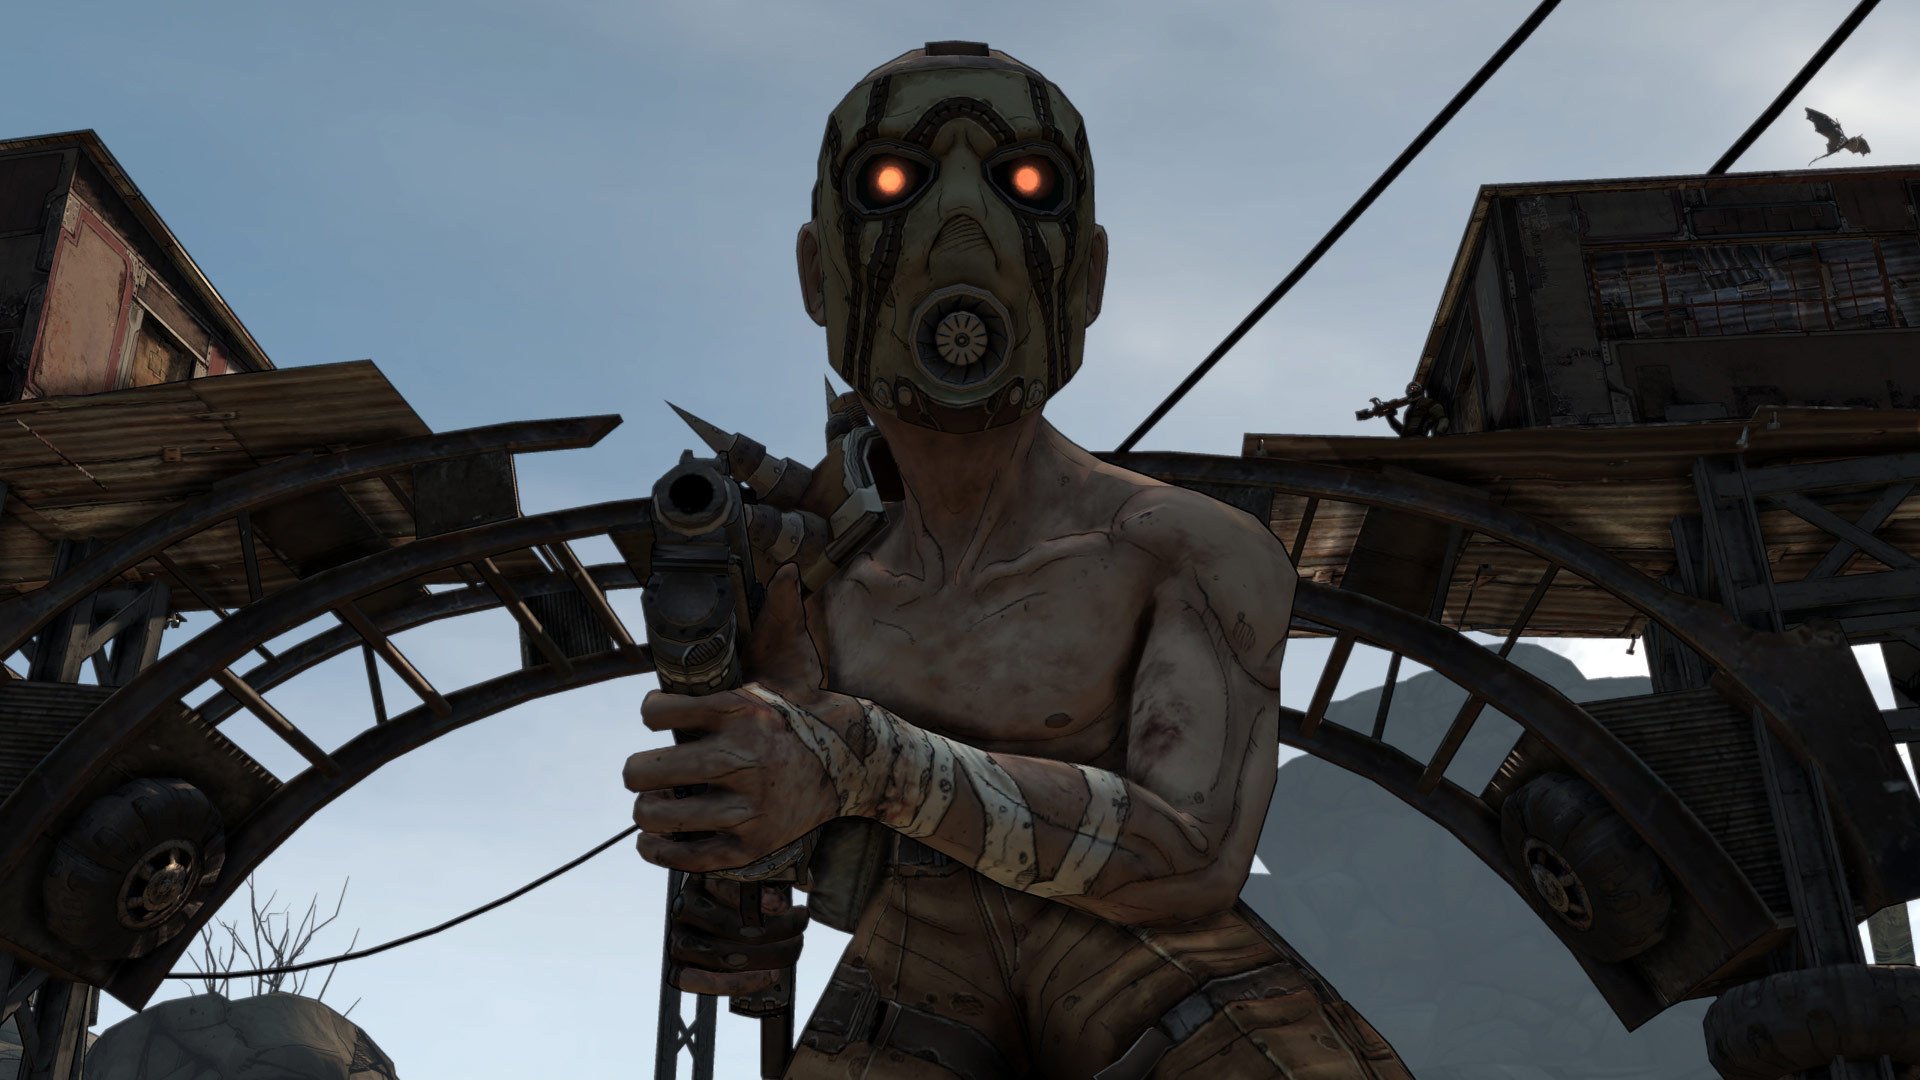 Turn Fallout 4 into Borderlands With This Cel-Shading Mod